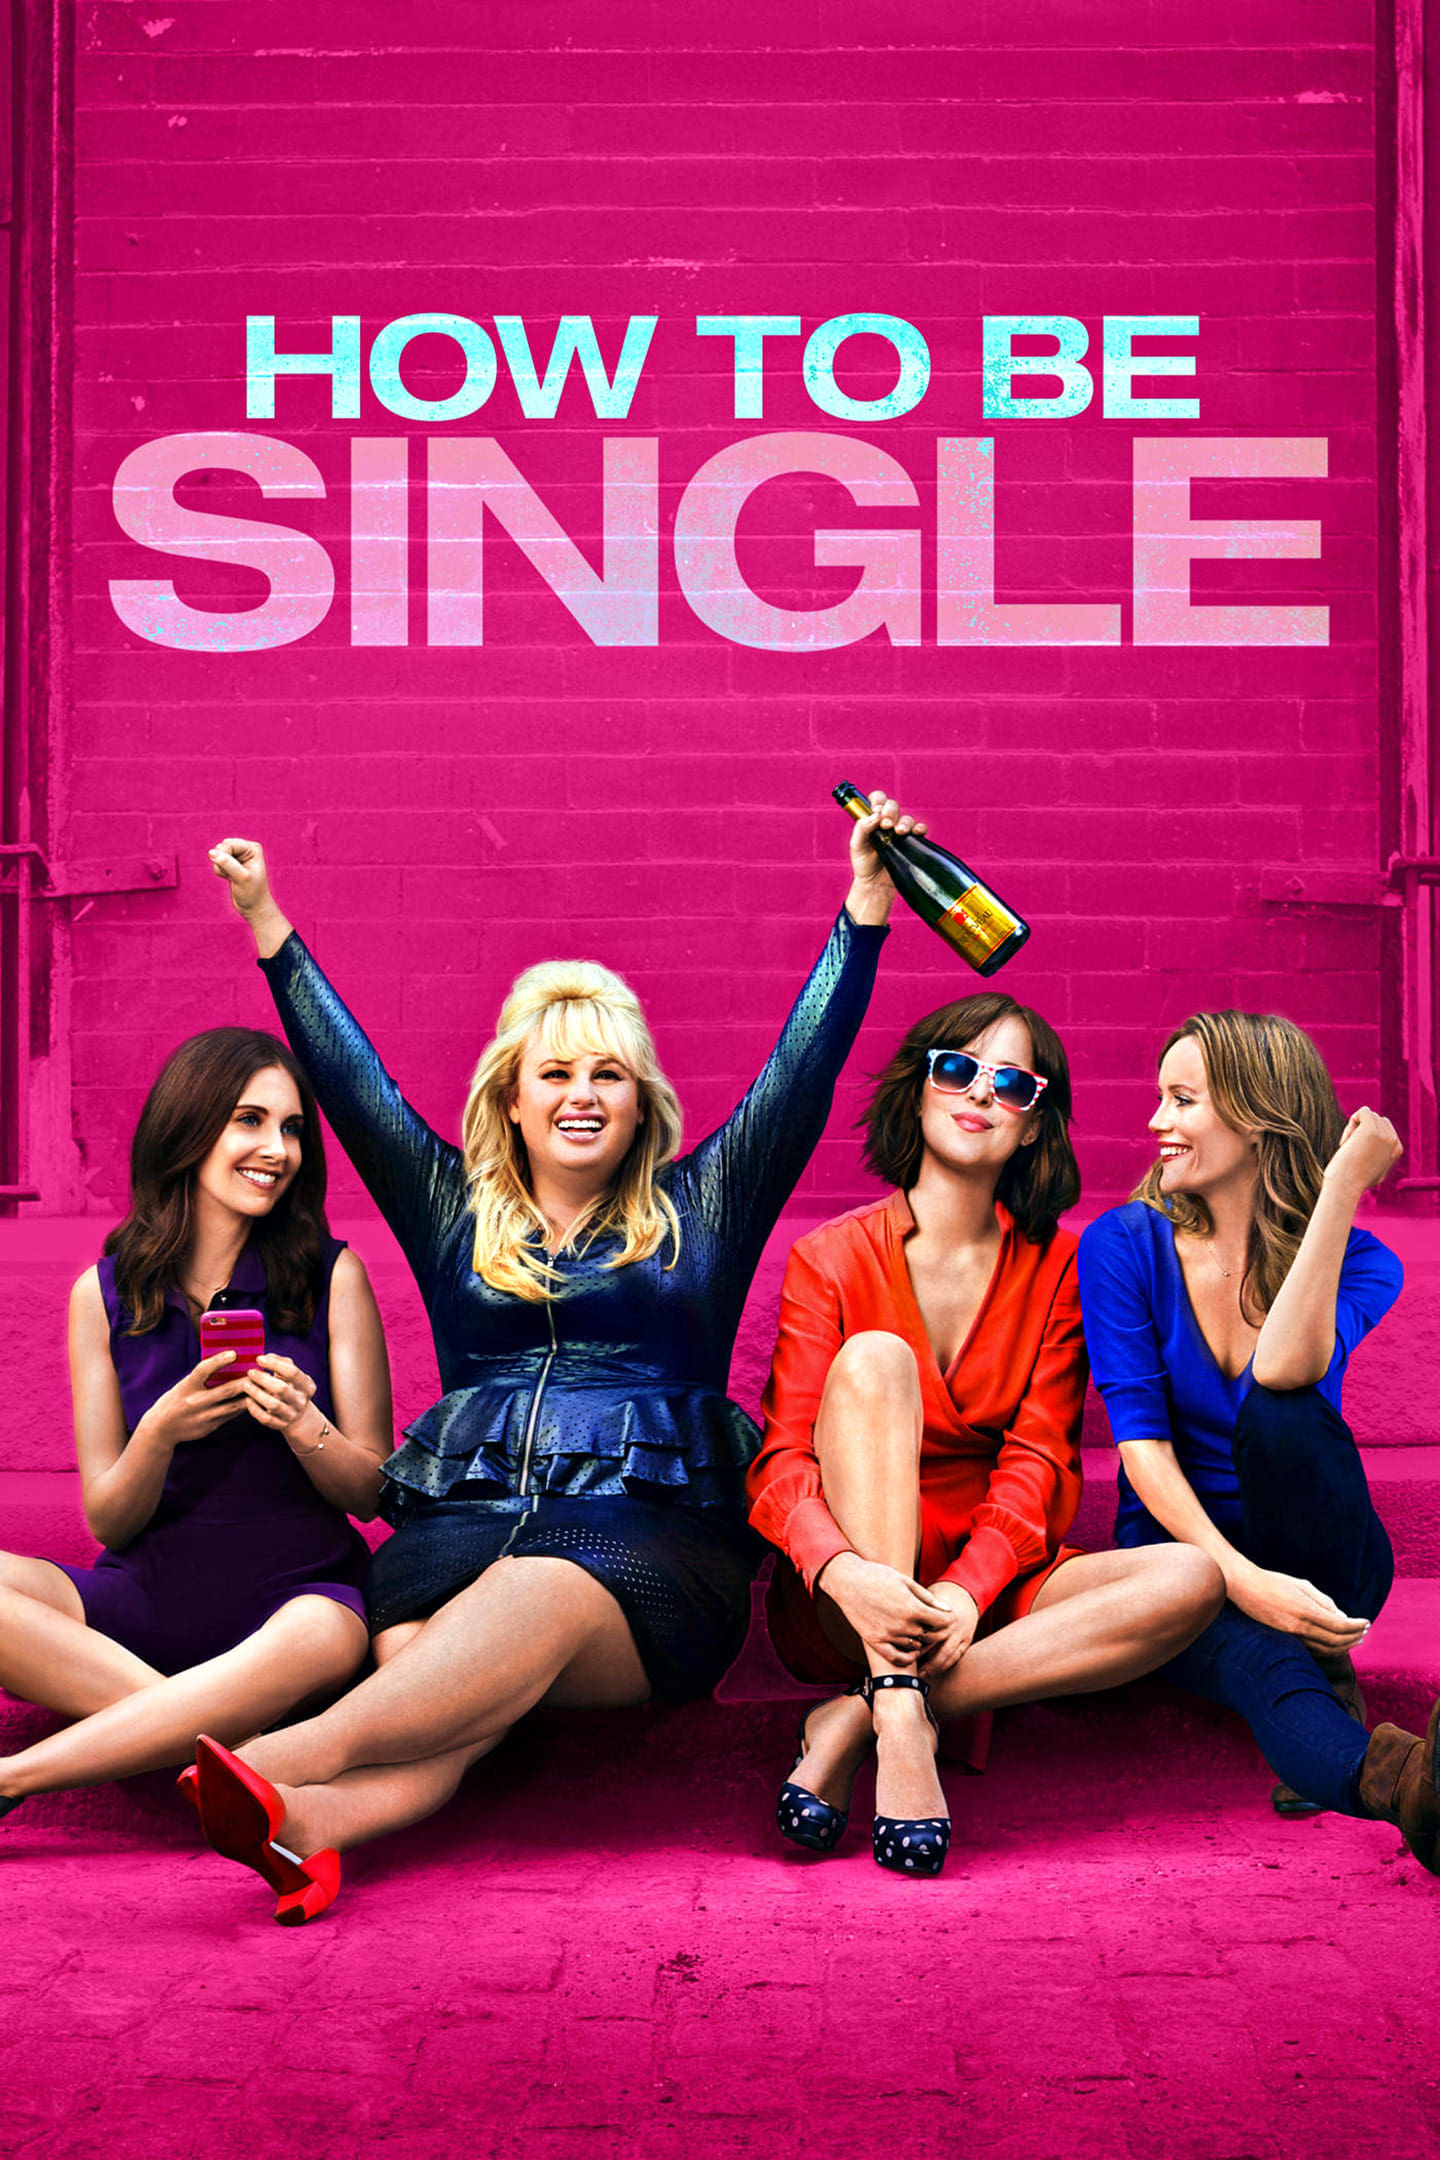 how to be single movie download torrent